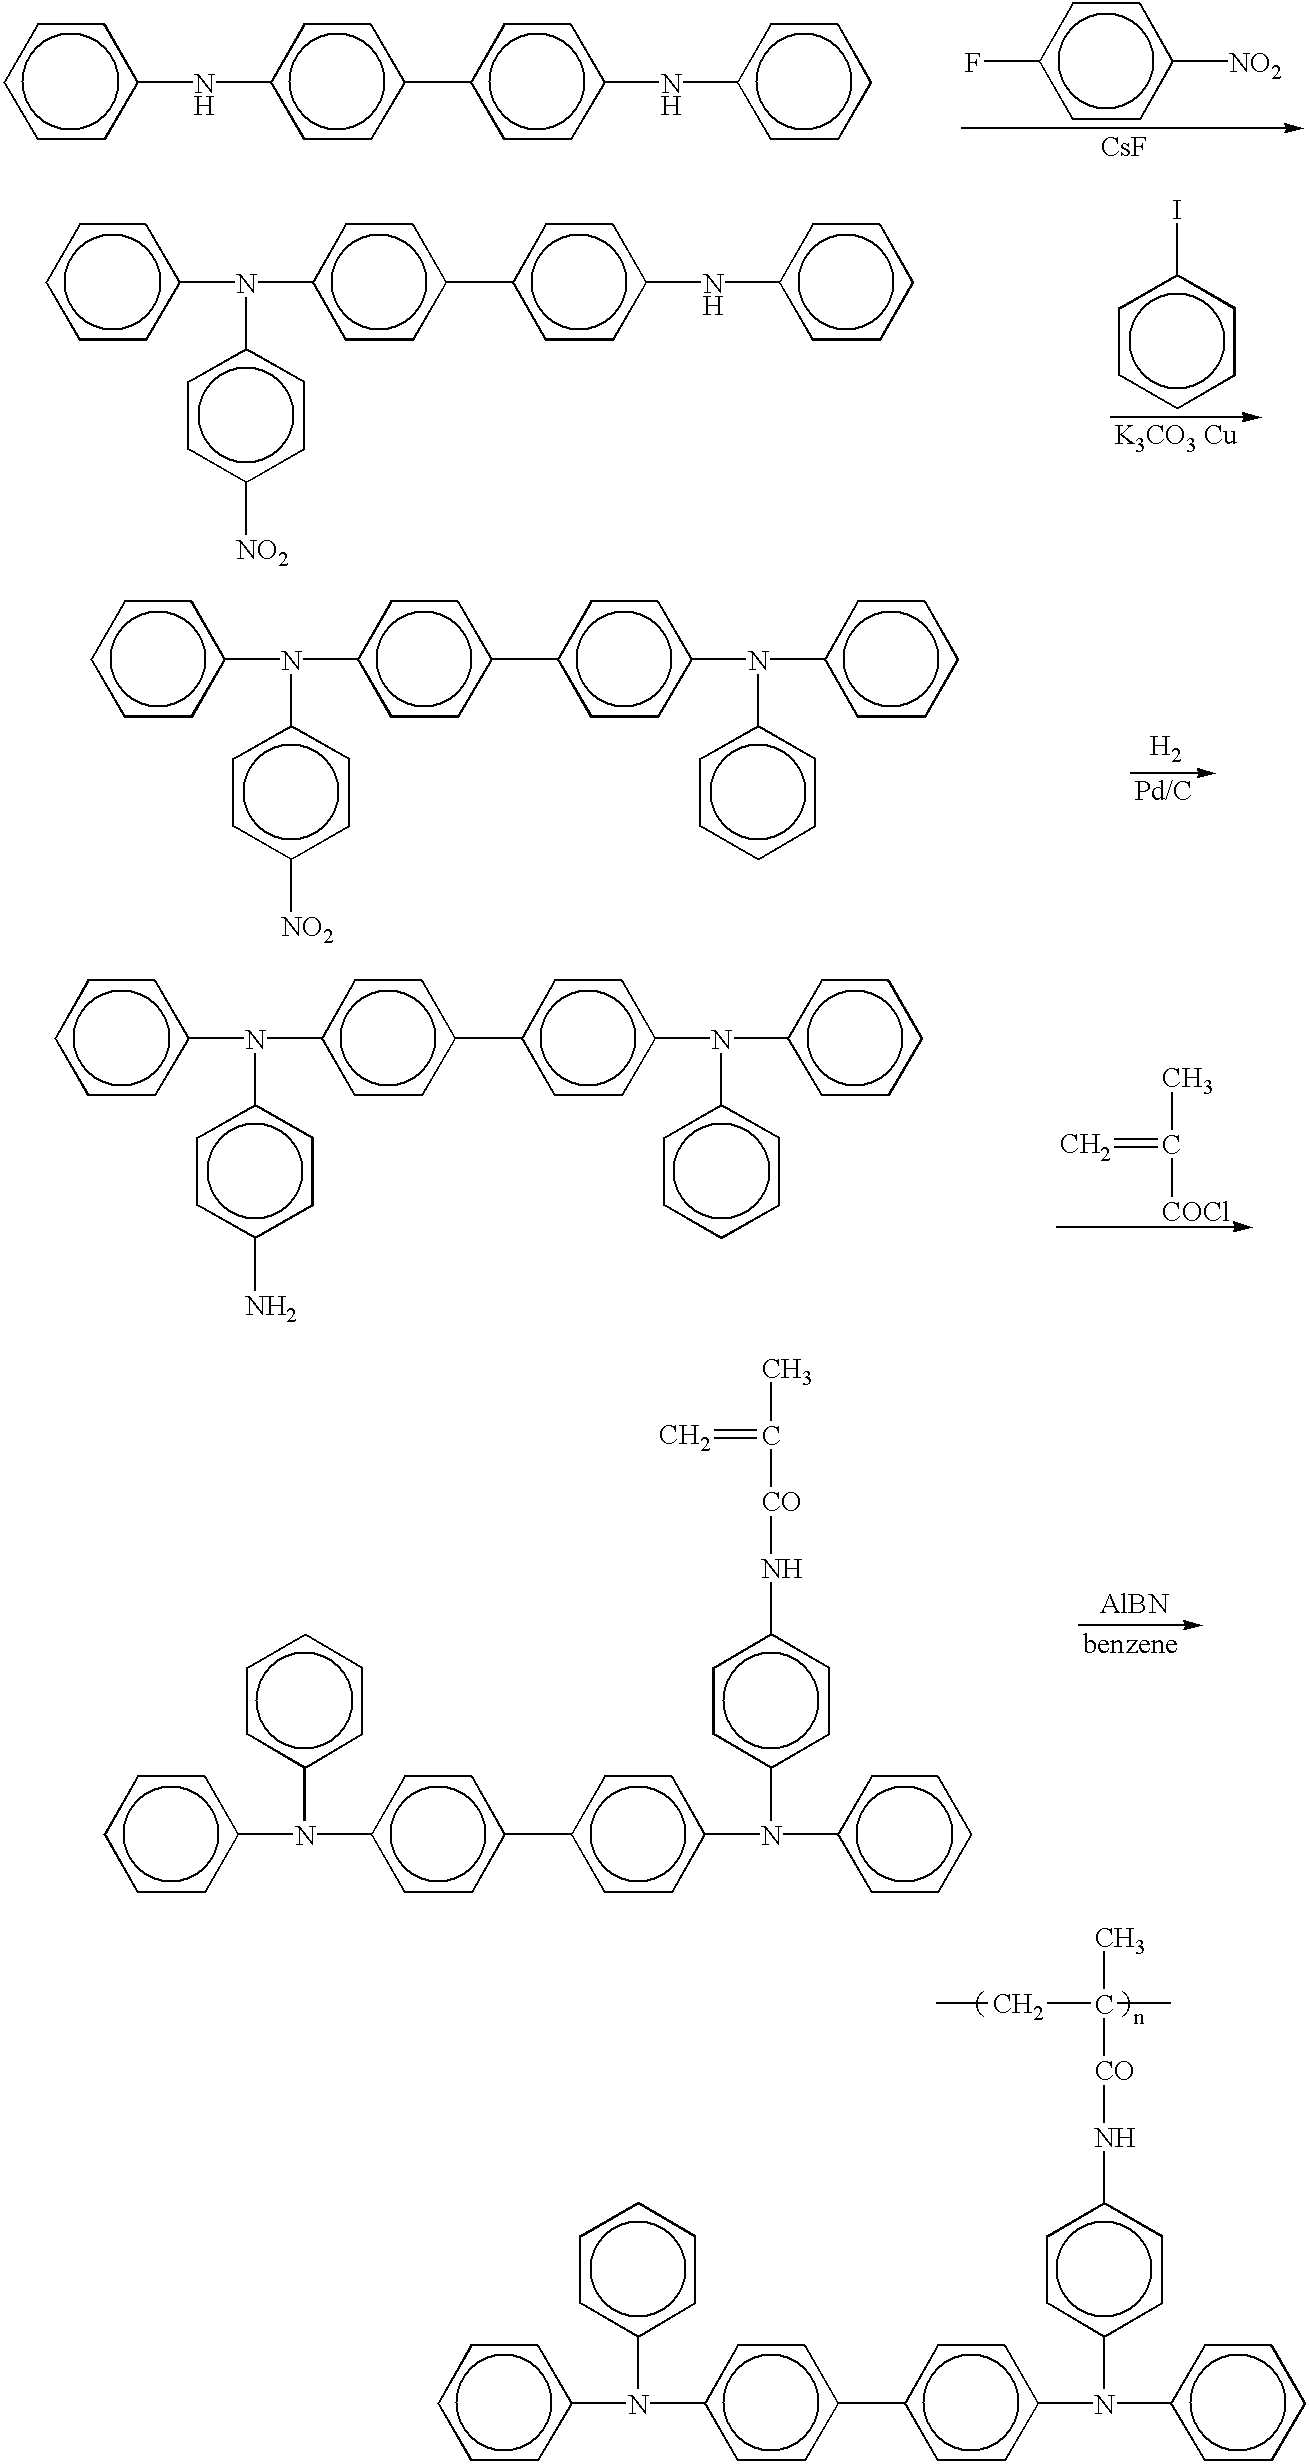 Multicolor organic EL element having plurality of organic dyes, method of manufacturing the same, and display using the same